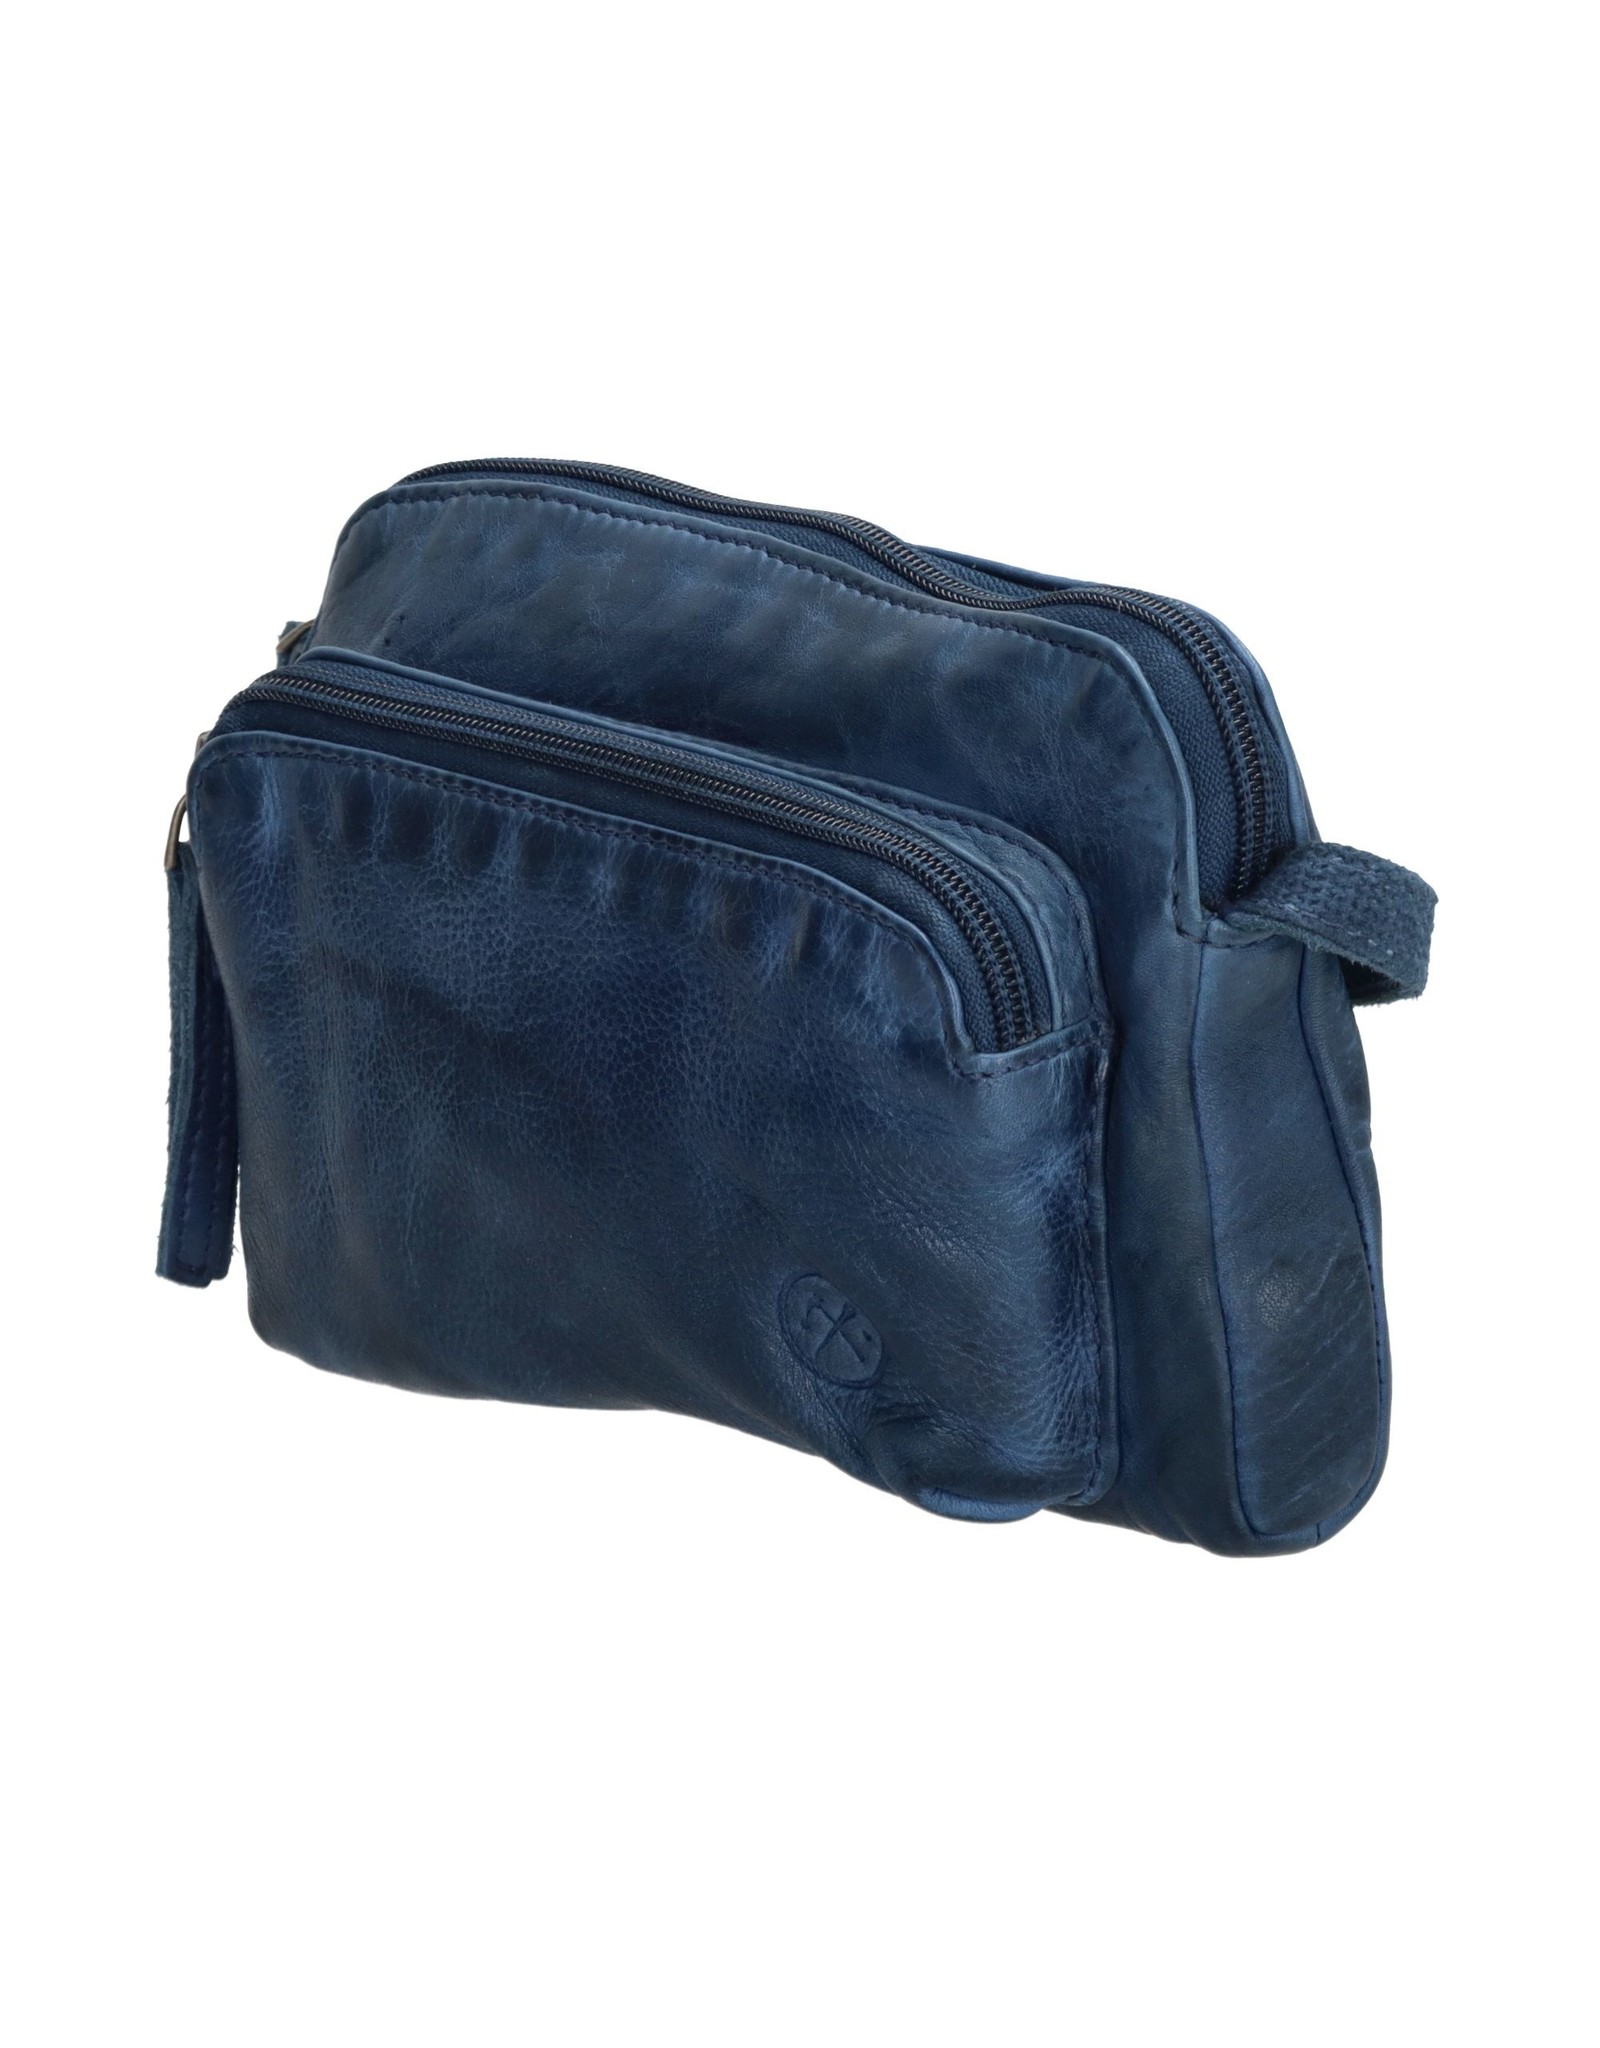 Hide & Stitches Leather Festival bags, waist bags and belt bags - Hide & Stitches Festival Bag Washed Leather Blue